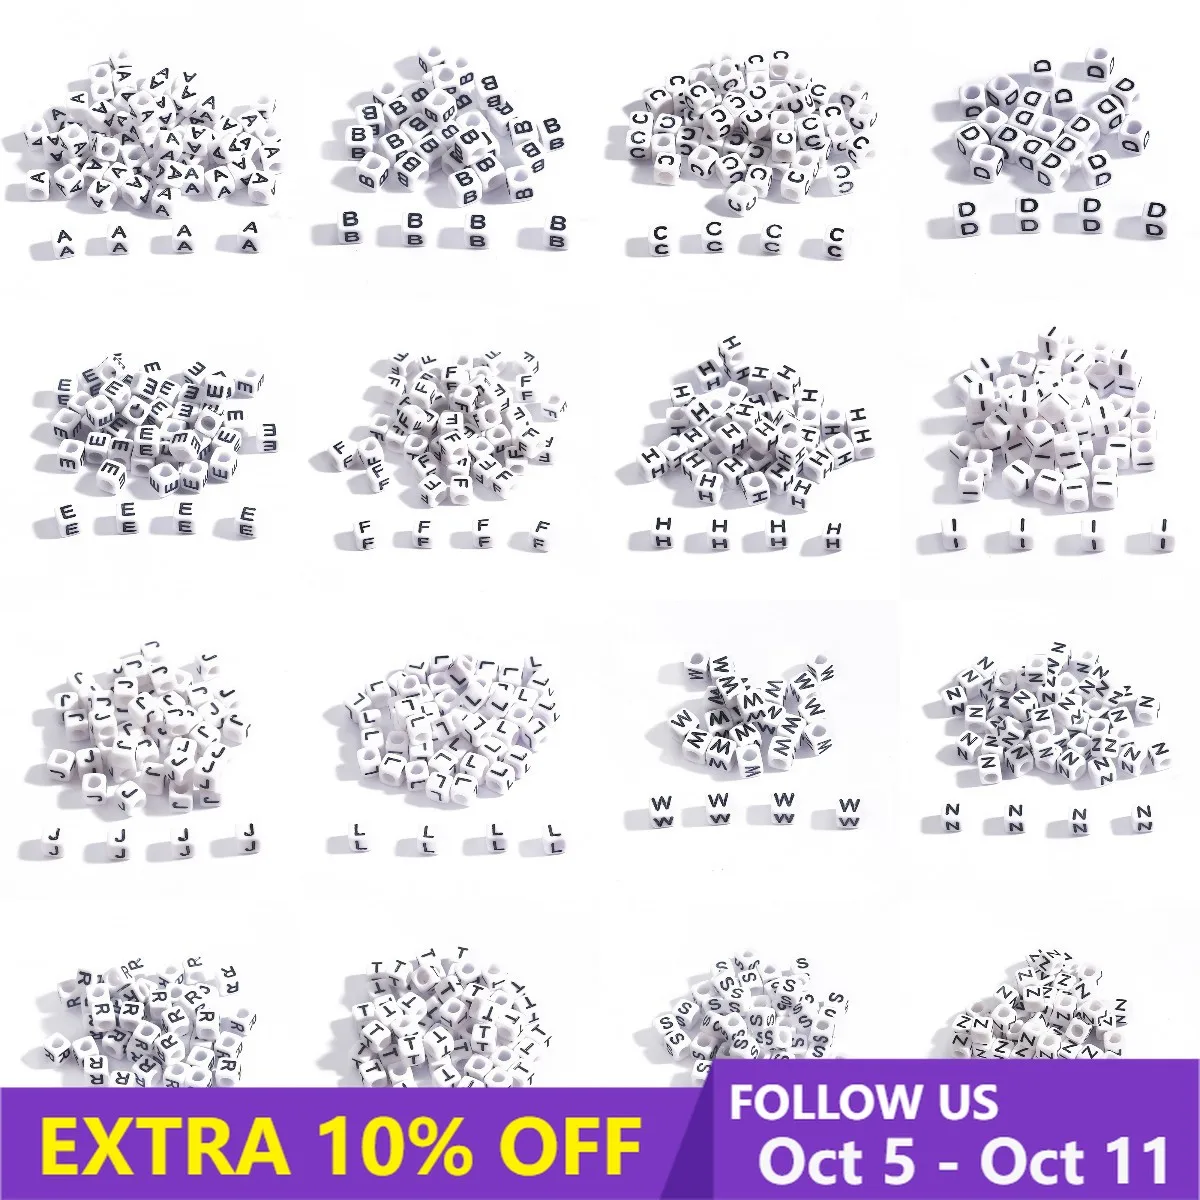 

100Pcs/Lot Square White and Black Alphabet Beads Cube Loose Spacer Letter Numbers Beads For Jewelry Making Diy Accessories 6x6mm